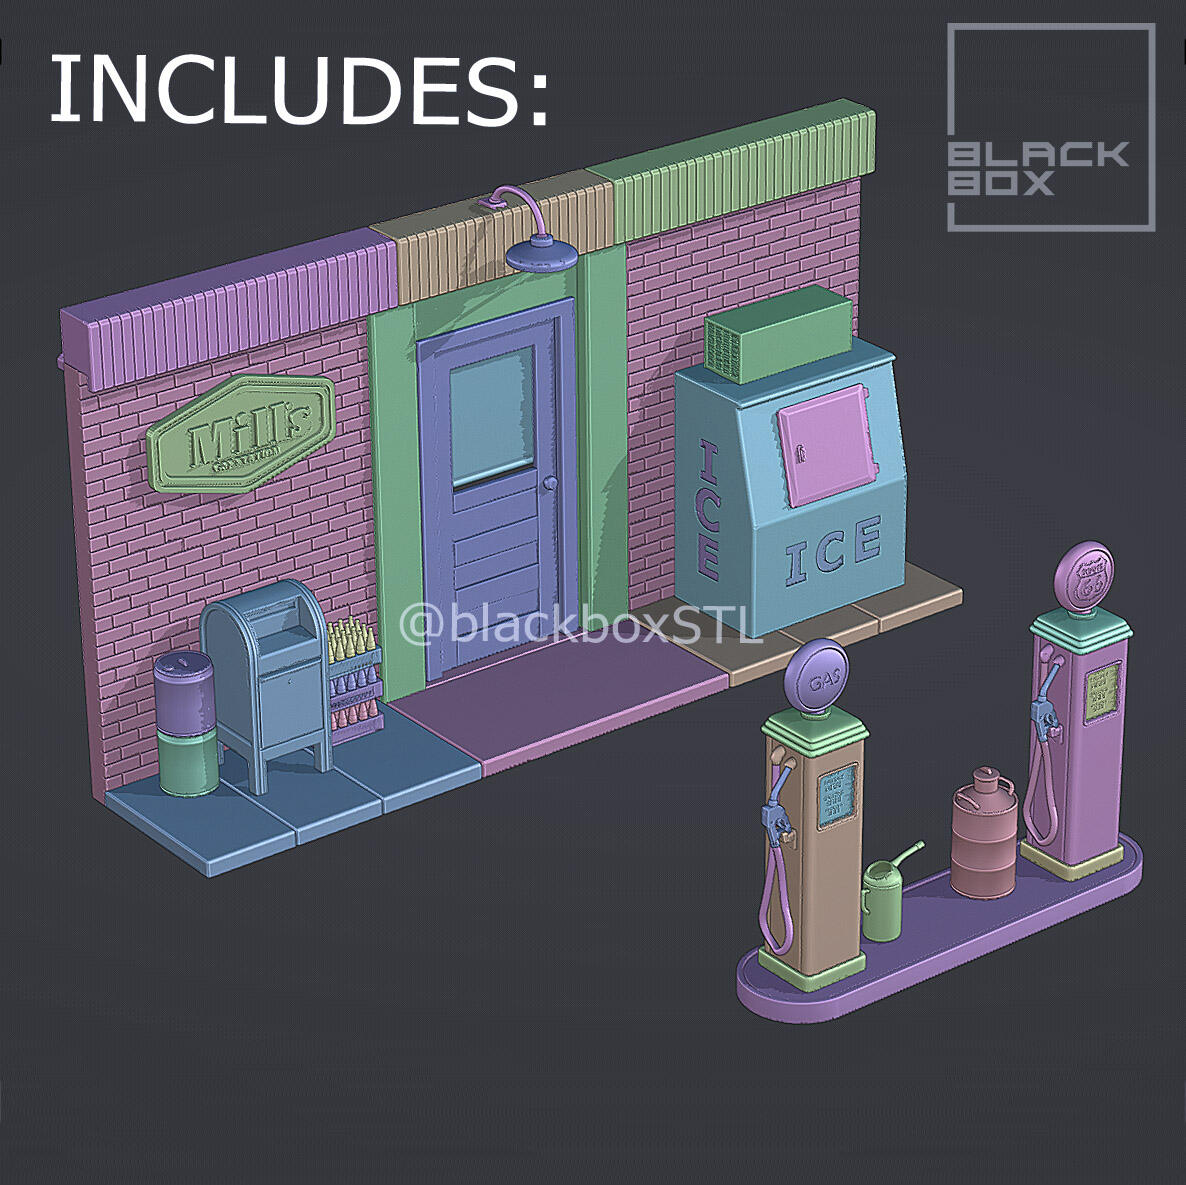 GAS STATION DIORAMA 1-24 AND 1-64TH SCALE 3D PRINT MODEL